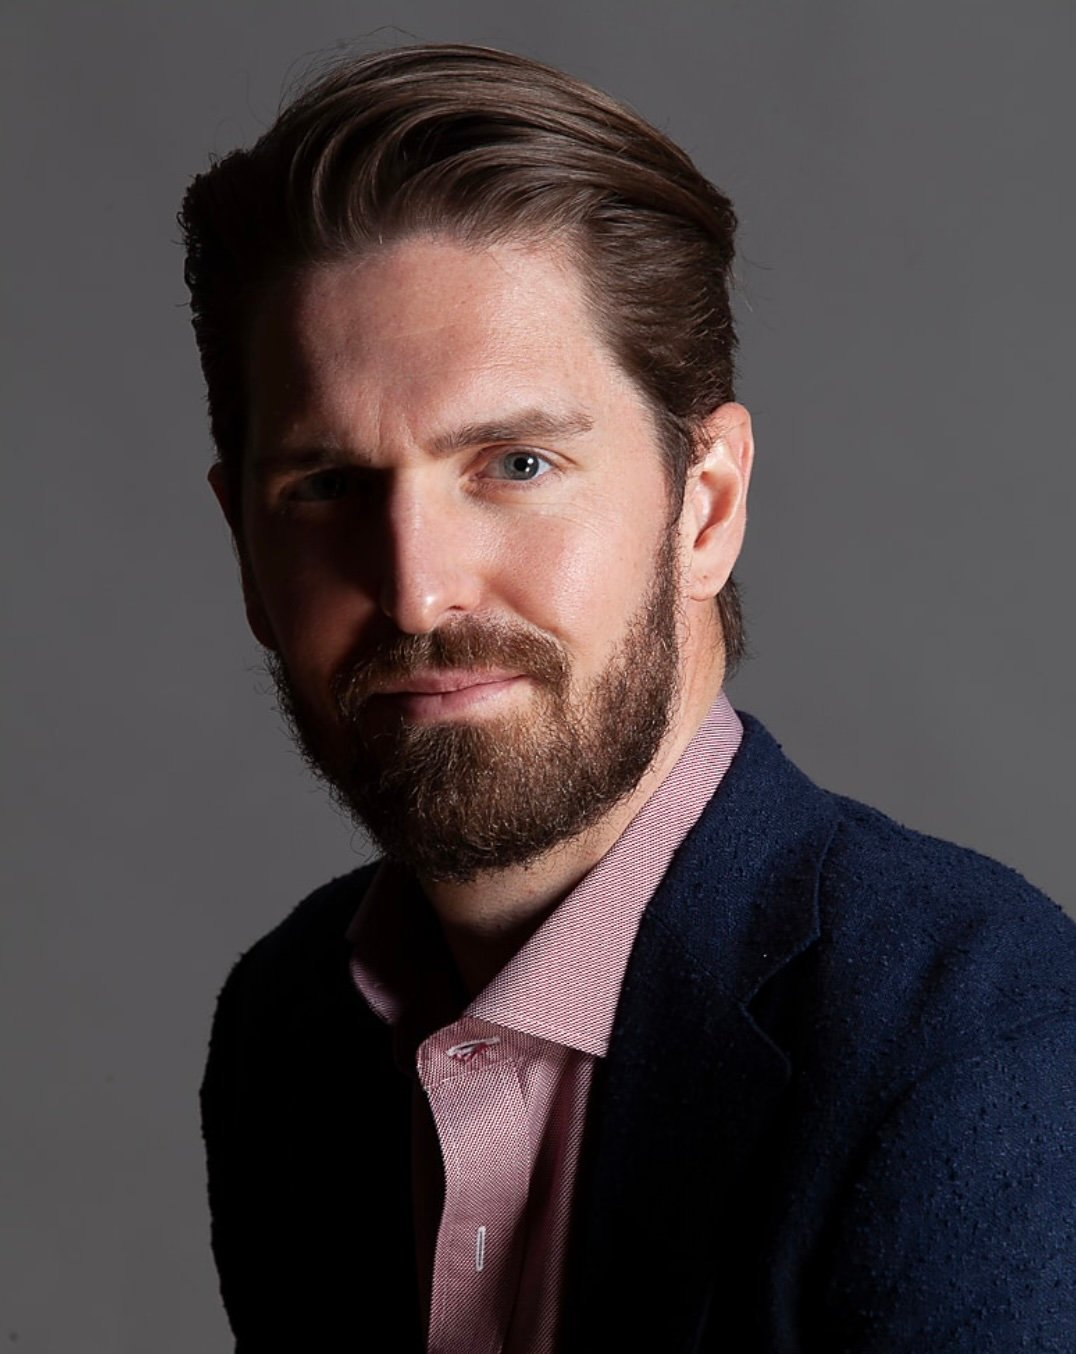 Lee Bradshaw, a light-skinned man with brown hair and a beard, wearing a collared shirt under a jacket.